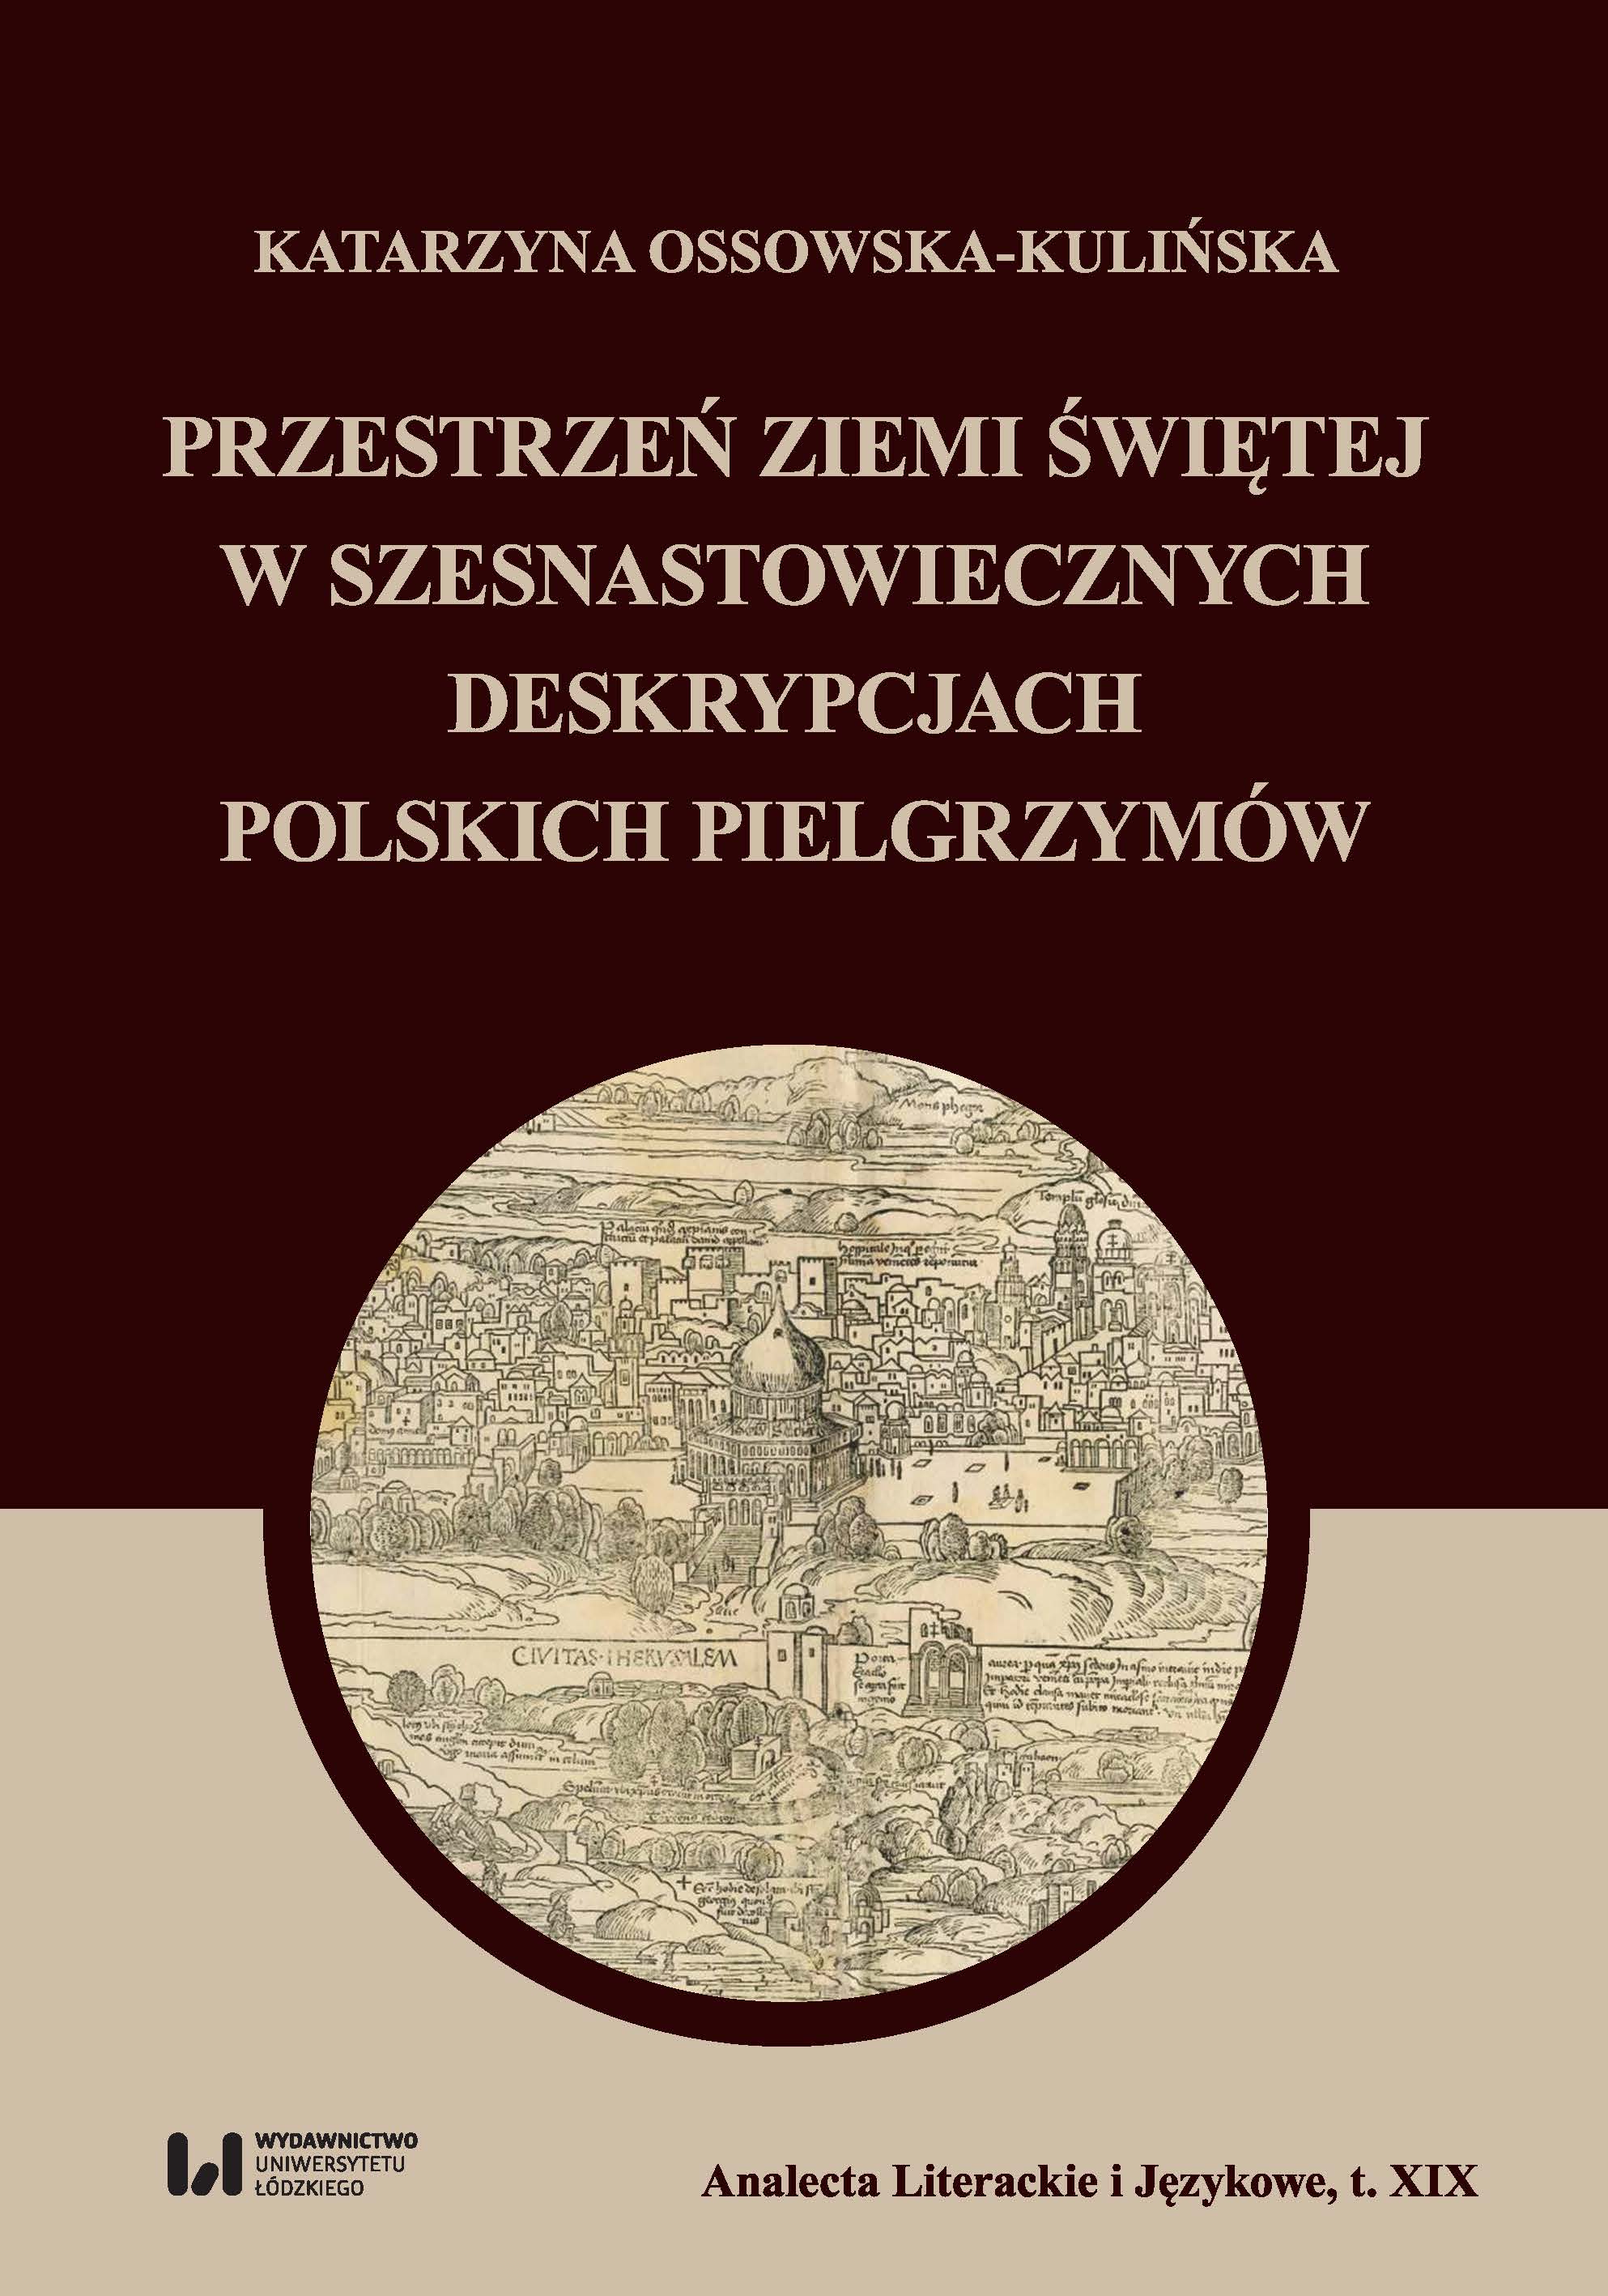 The space of the Holy Land in the 16th-century descriptions of Polish pilgrims. 
Series: Analecta Literackie i Językowe XIX